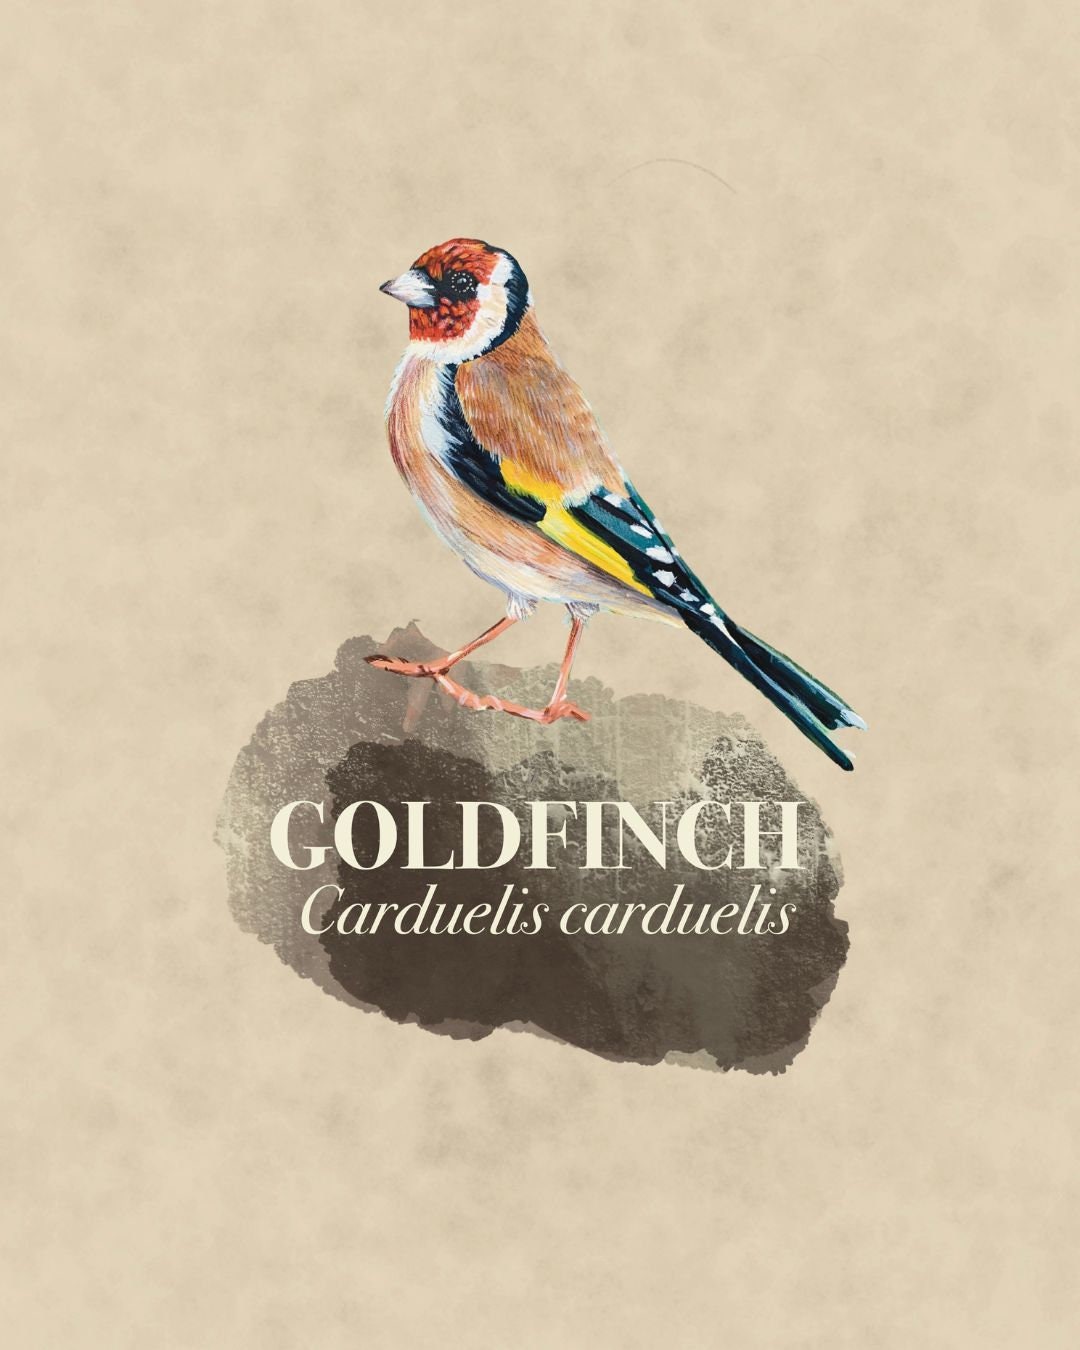 Garden Bird A4 print, Goldfinch, vintage style nature print, wildlife inspired wall art, ideal gift for nature and wildlife lovers